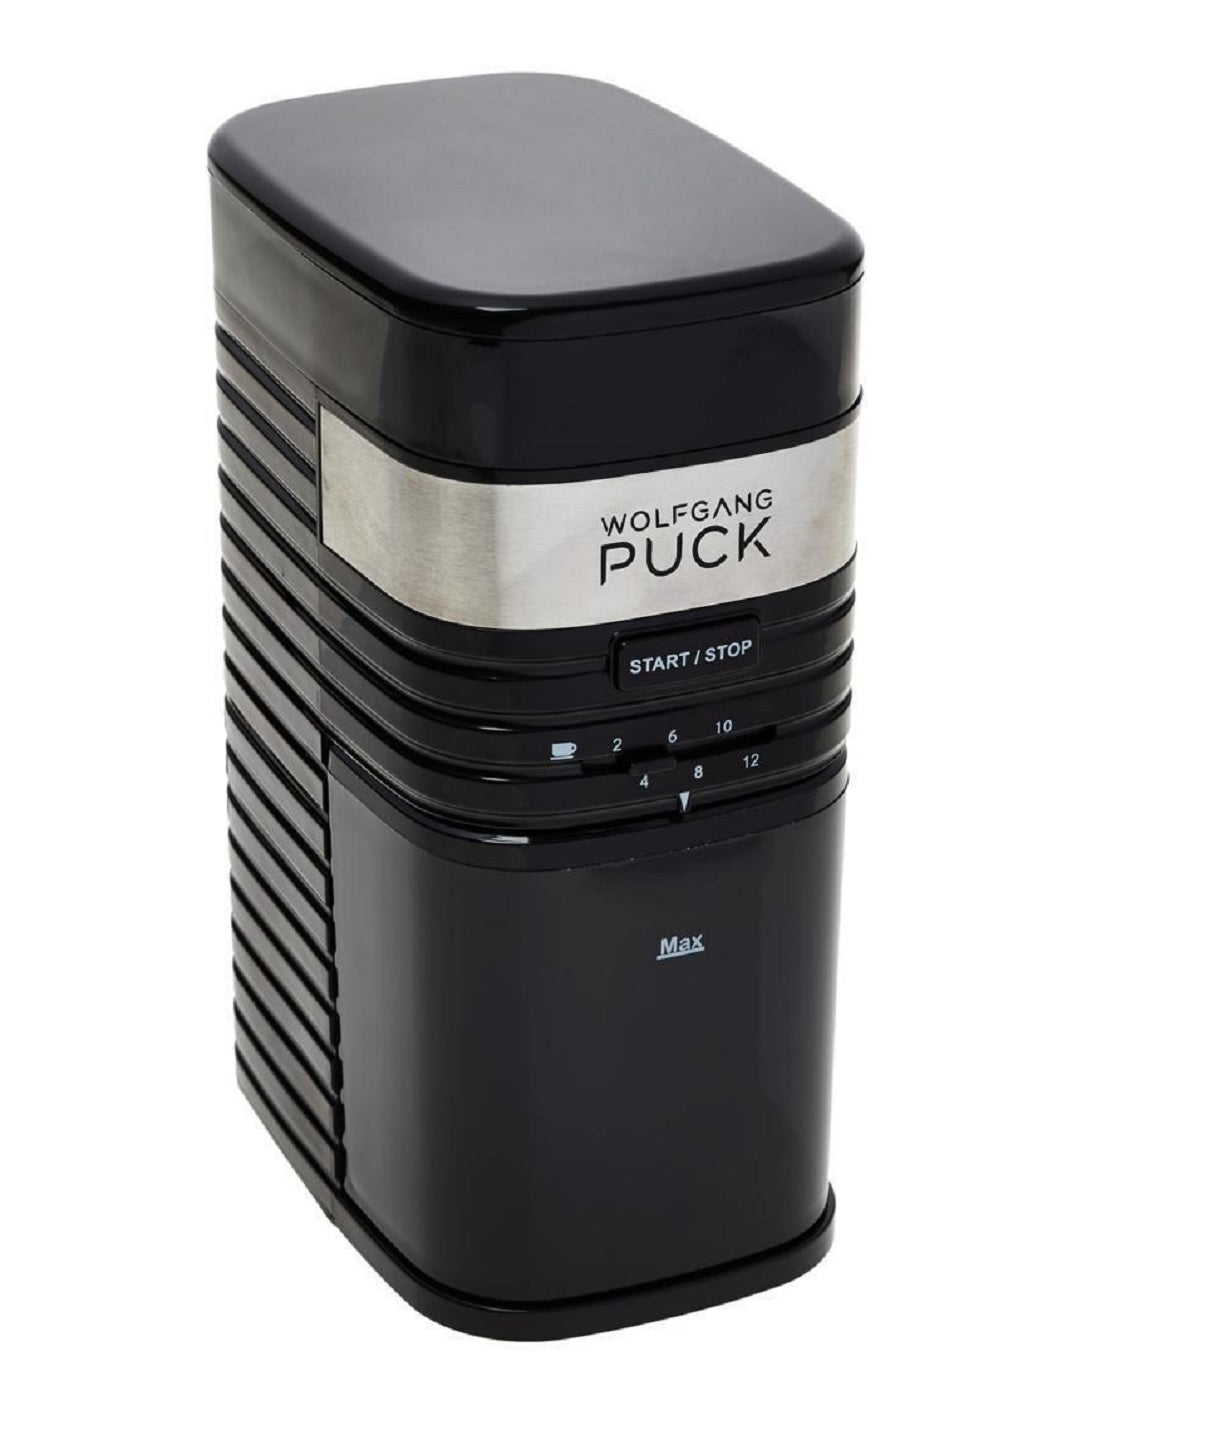 Wolfgang Puck Other Small Appliances